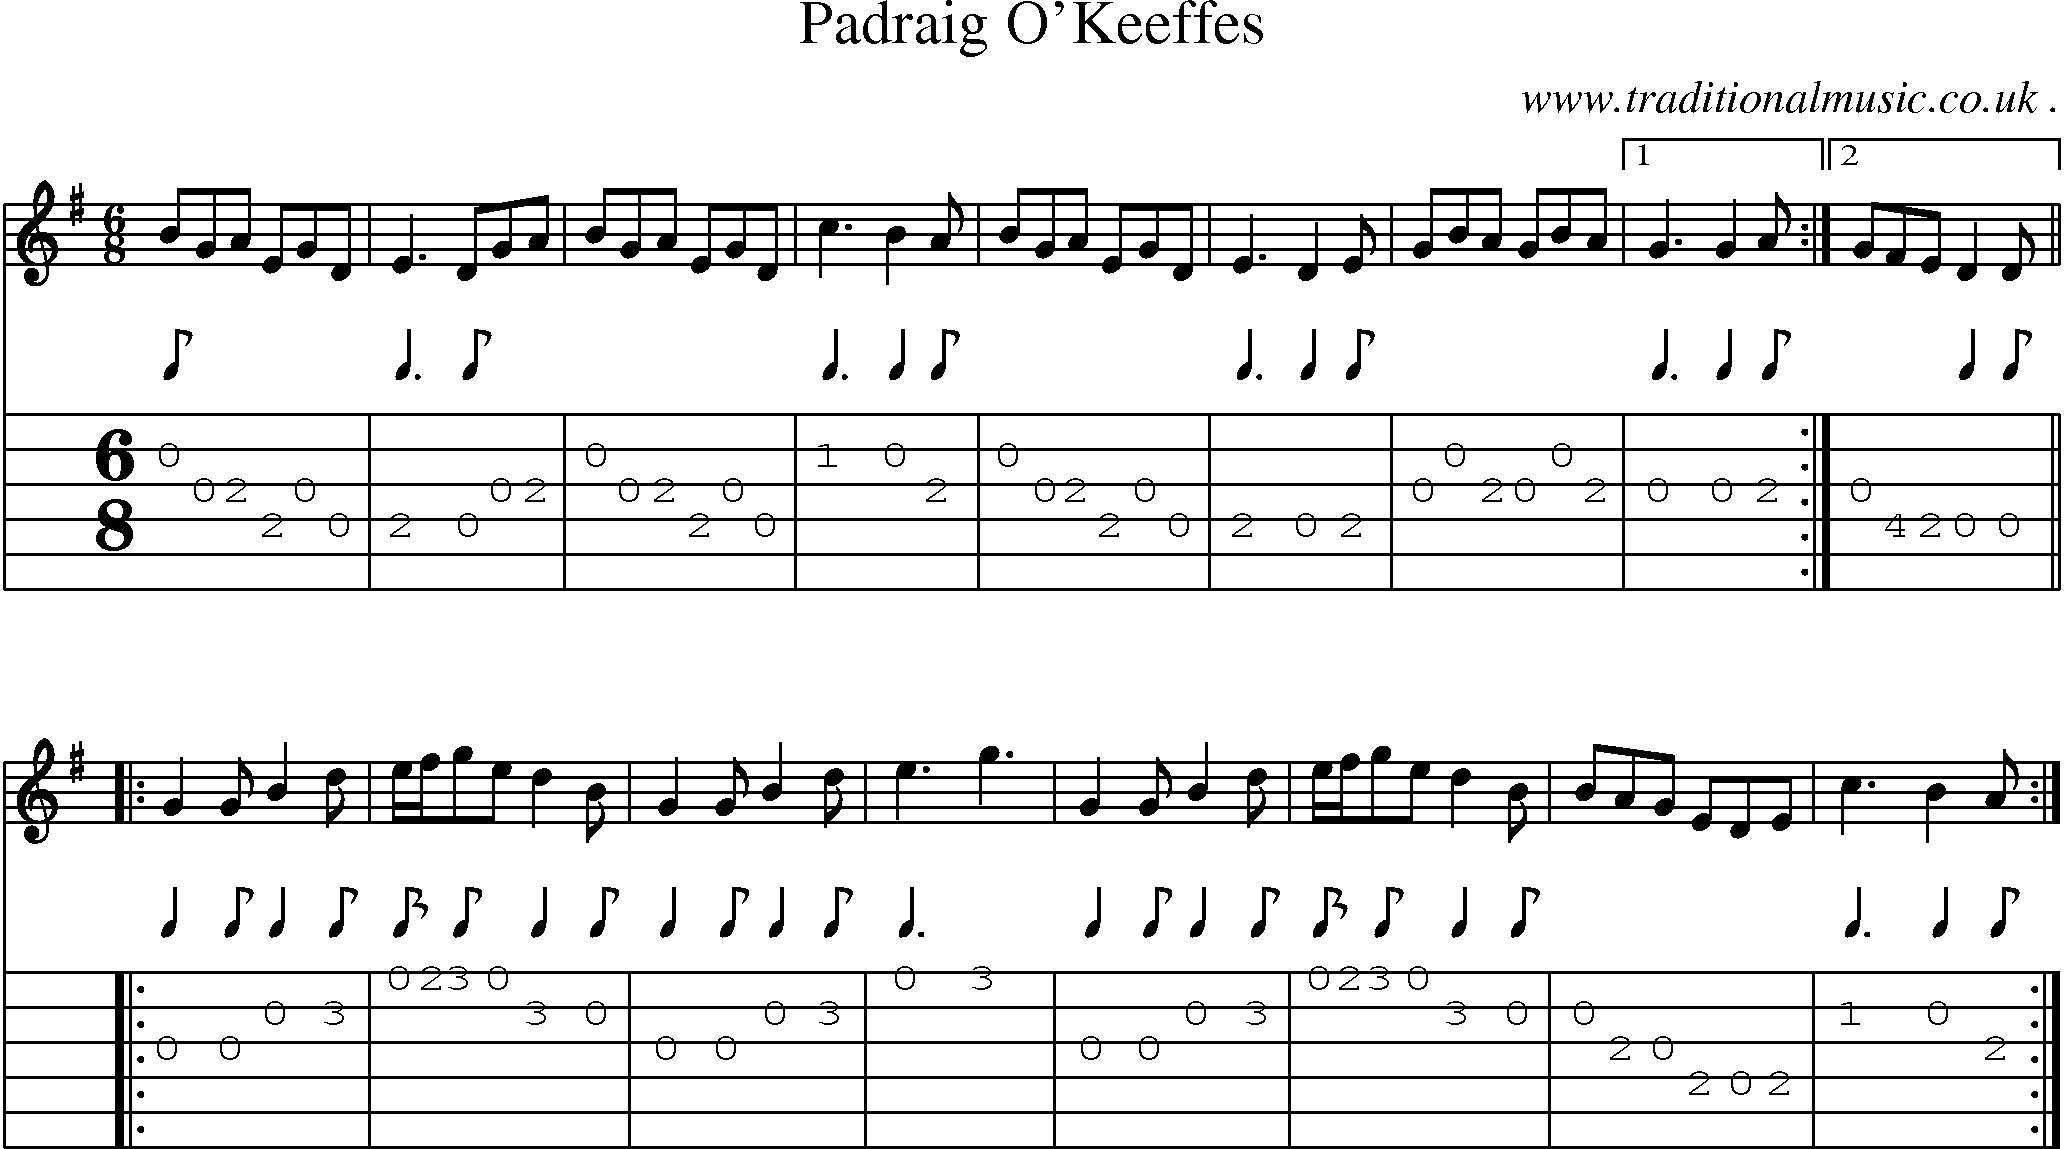 Sheet-Music and Guitar Tabs for Padraig Okeeffes